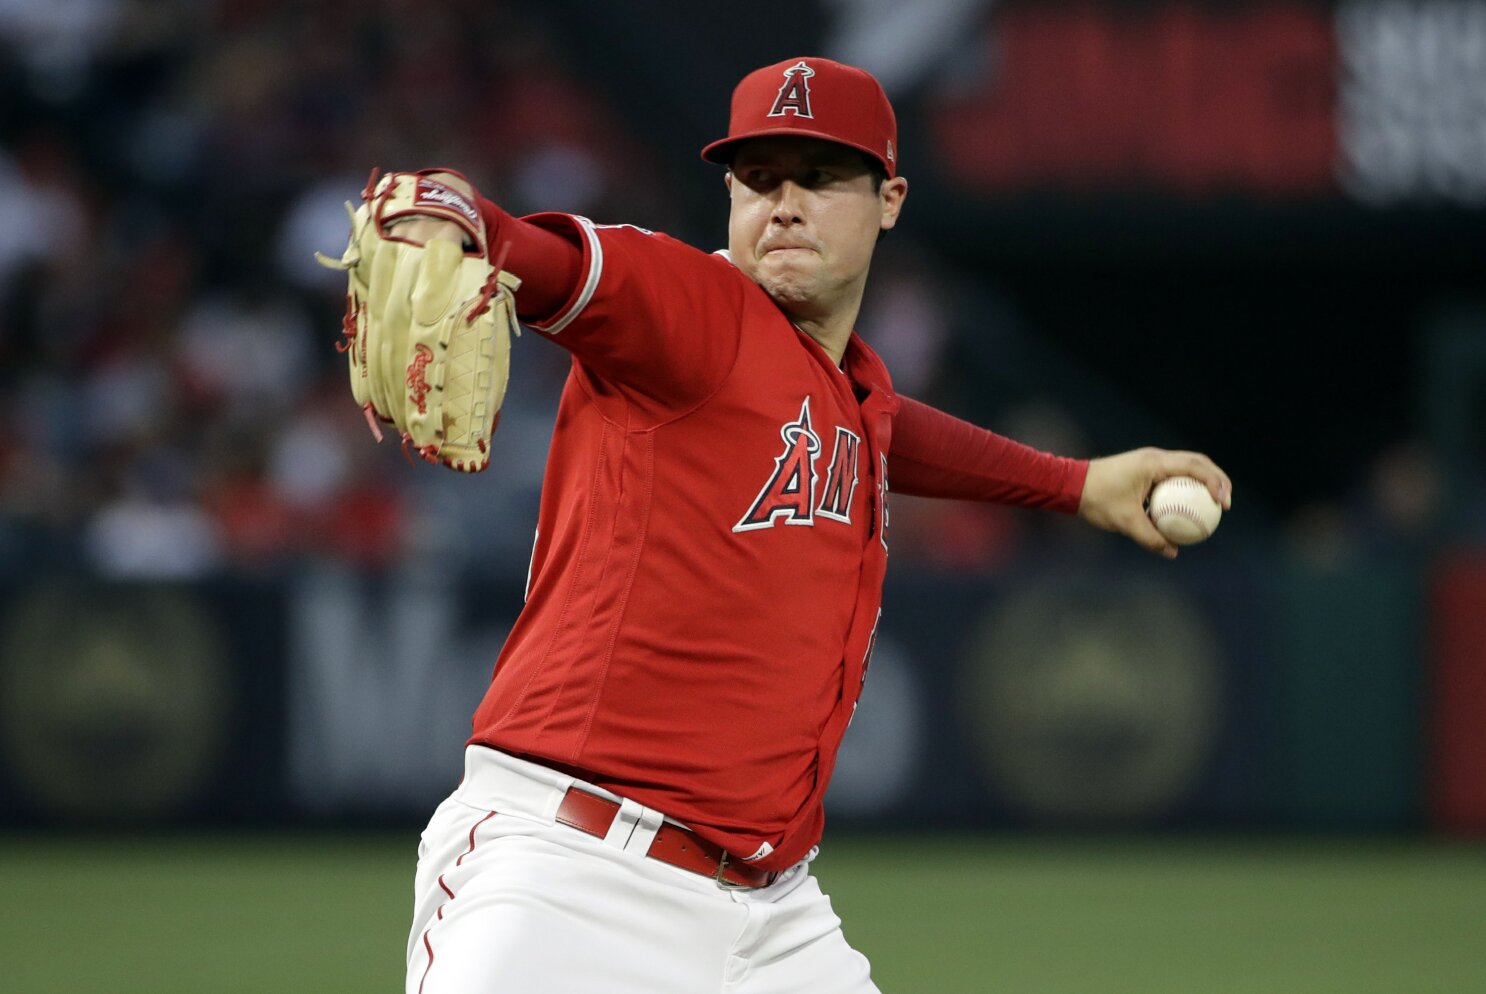 Angels' Mike Trout was 'shocked' to learn cause of Tyler Skaggs' death